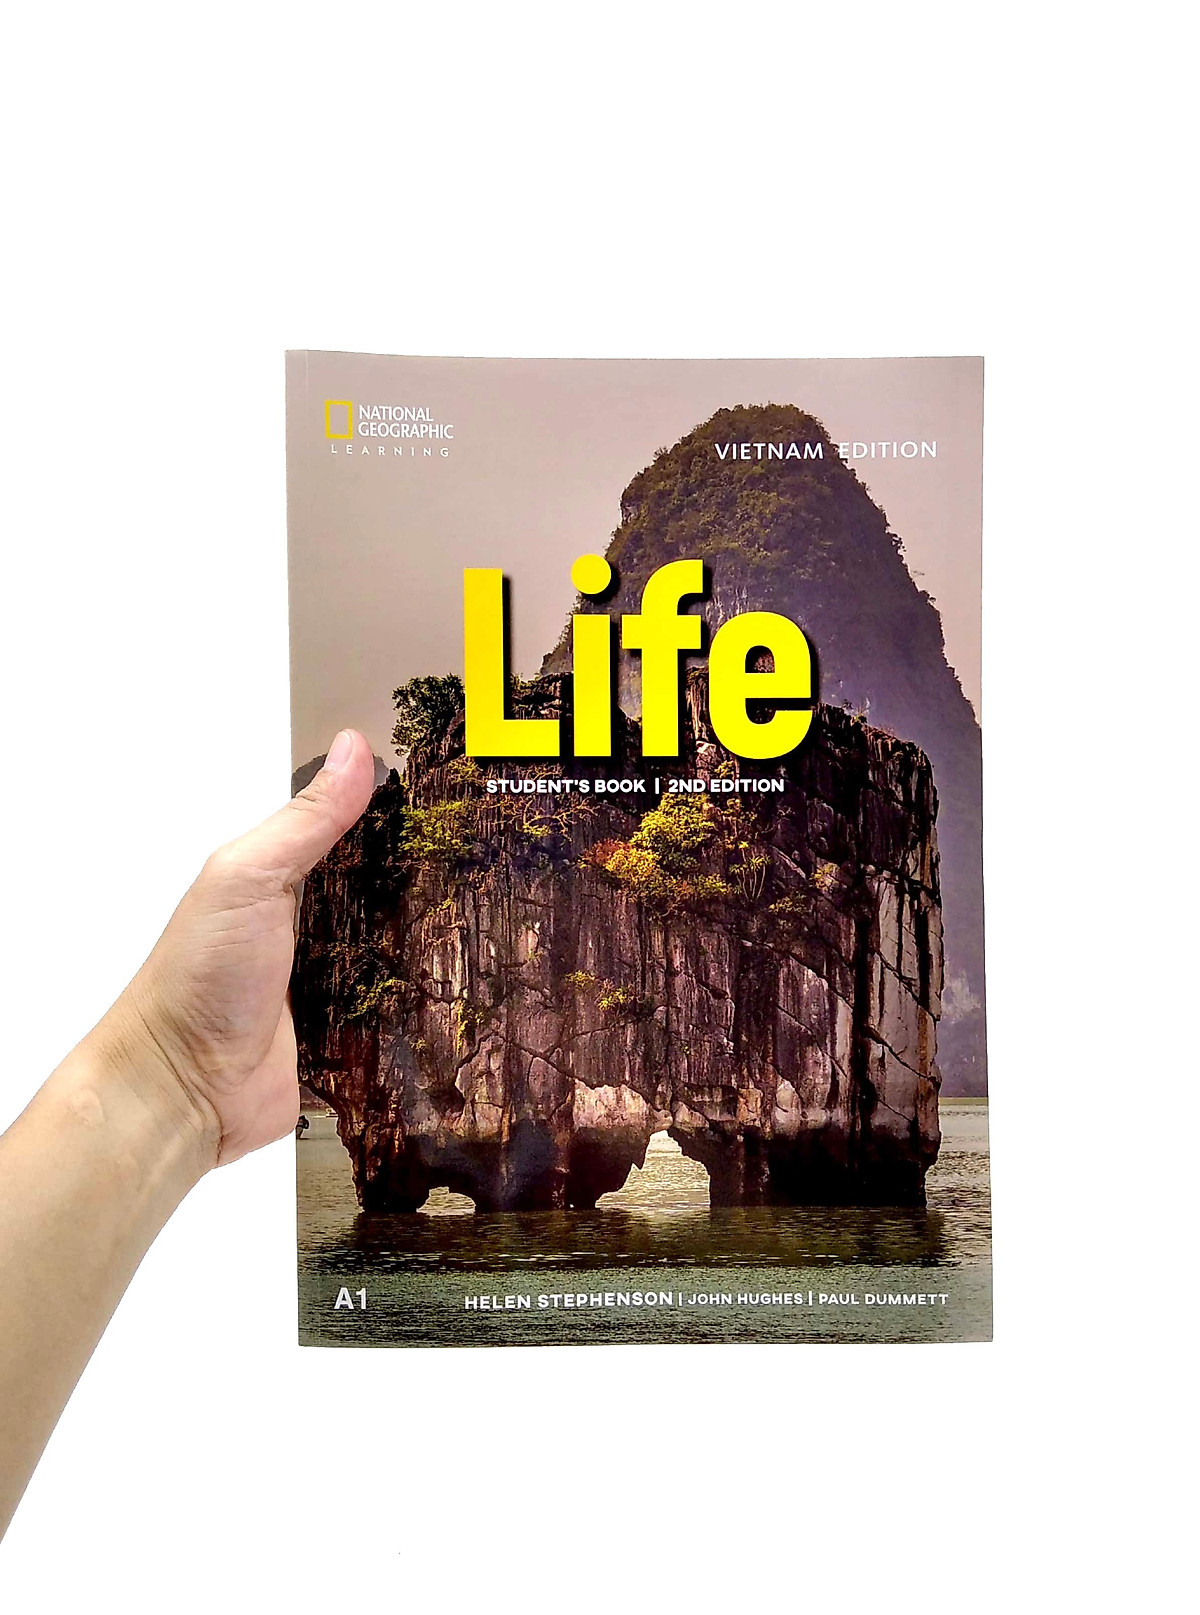 Life (BrE) (2 Ed.) (VN Ed.) A1: Student Book with Web App Code with Online Workbook